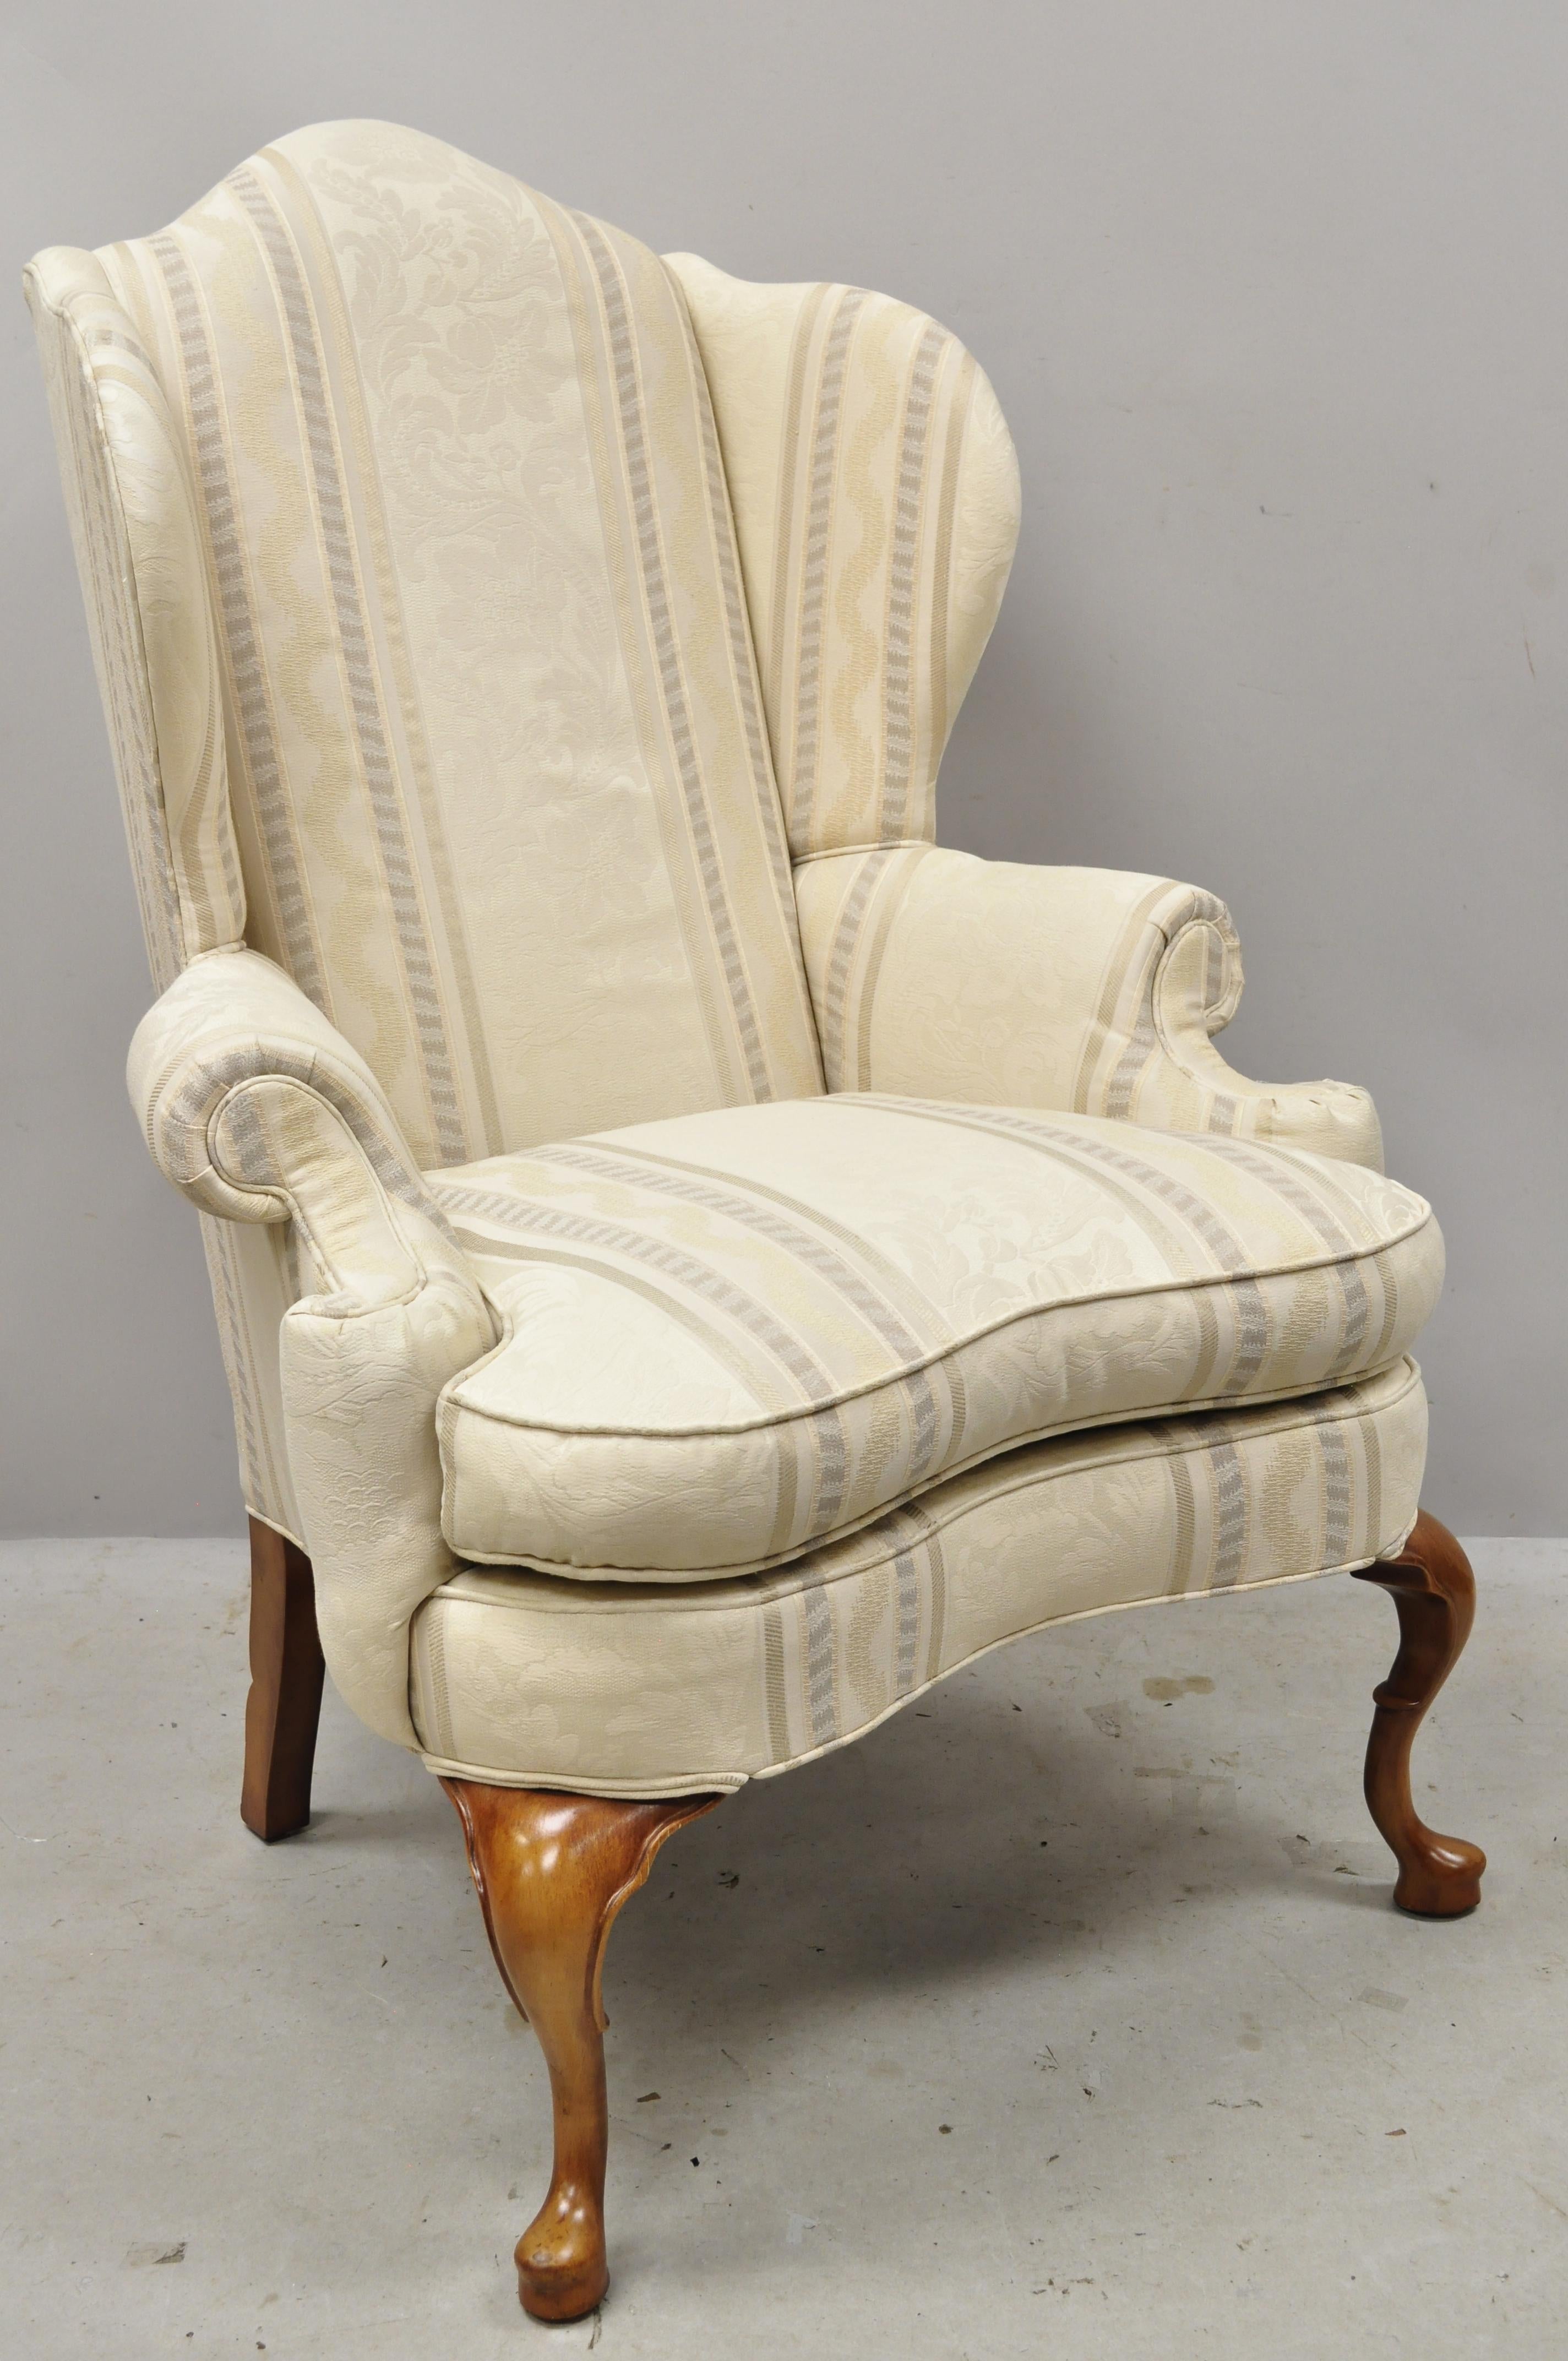 Pennsylvania house Queen Anne rolled arm wingback lounge armchair. Item features rolled arms, tall winged back, notch carved rear legs, bow front, solid wood frame, beautiful wood grain, original labels, shapely Queen Anne legs, quality American